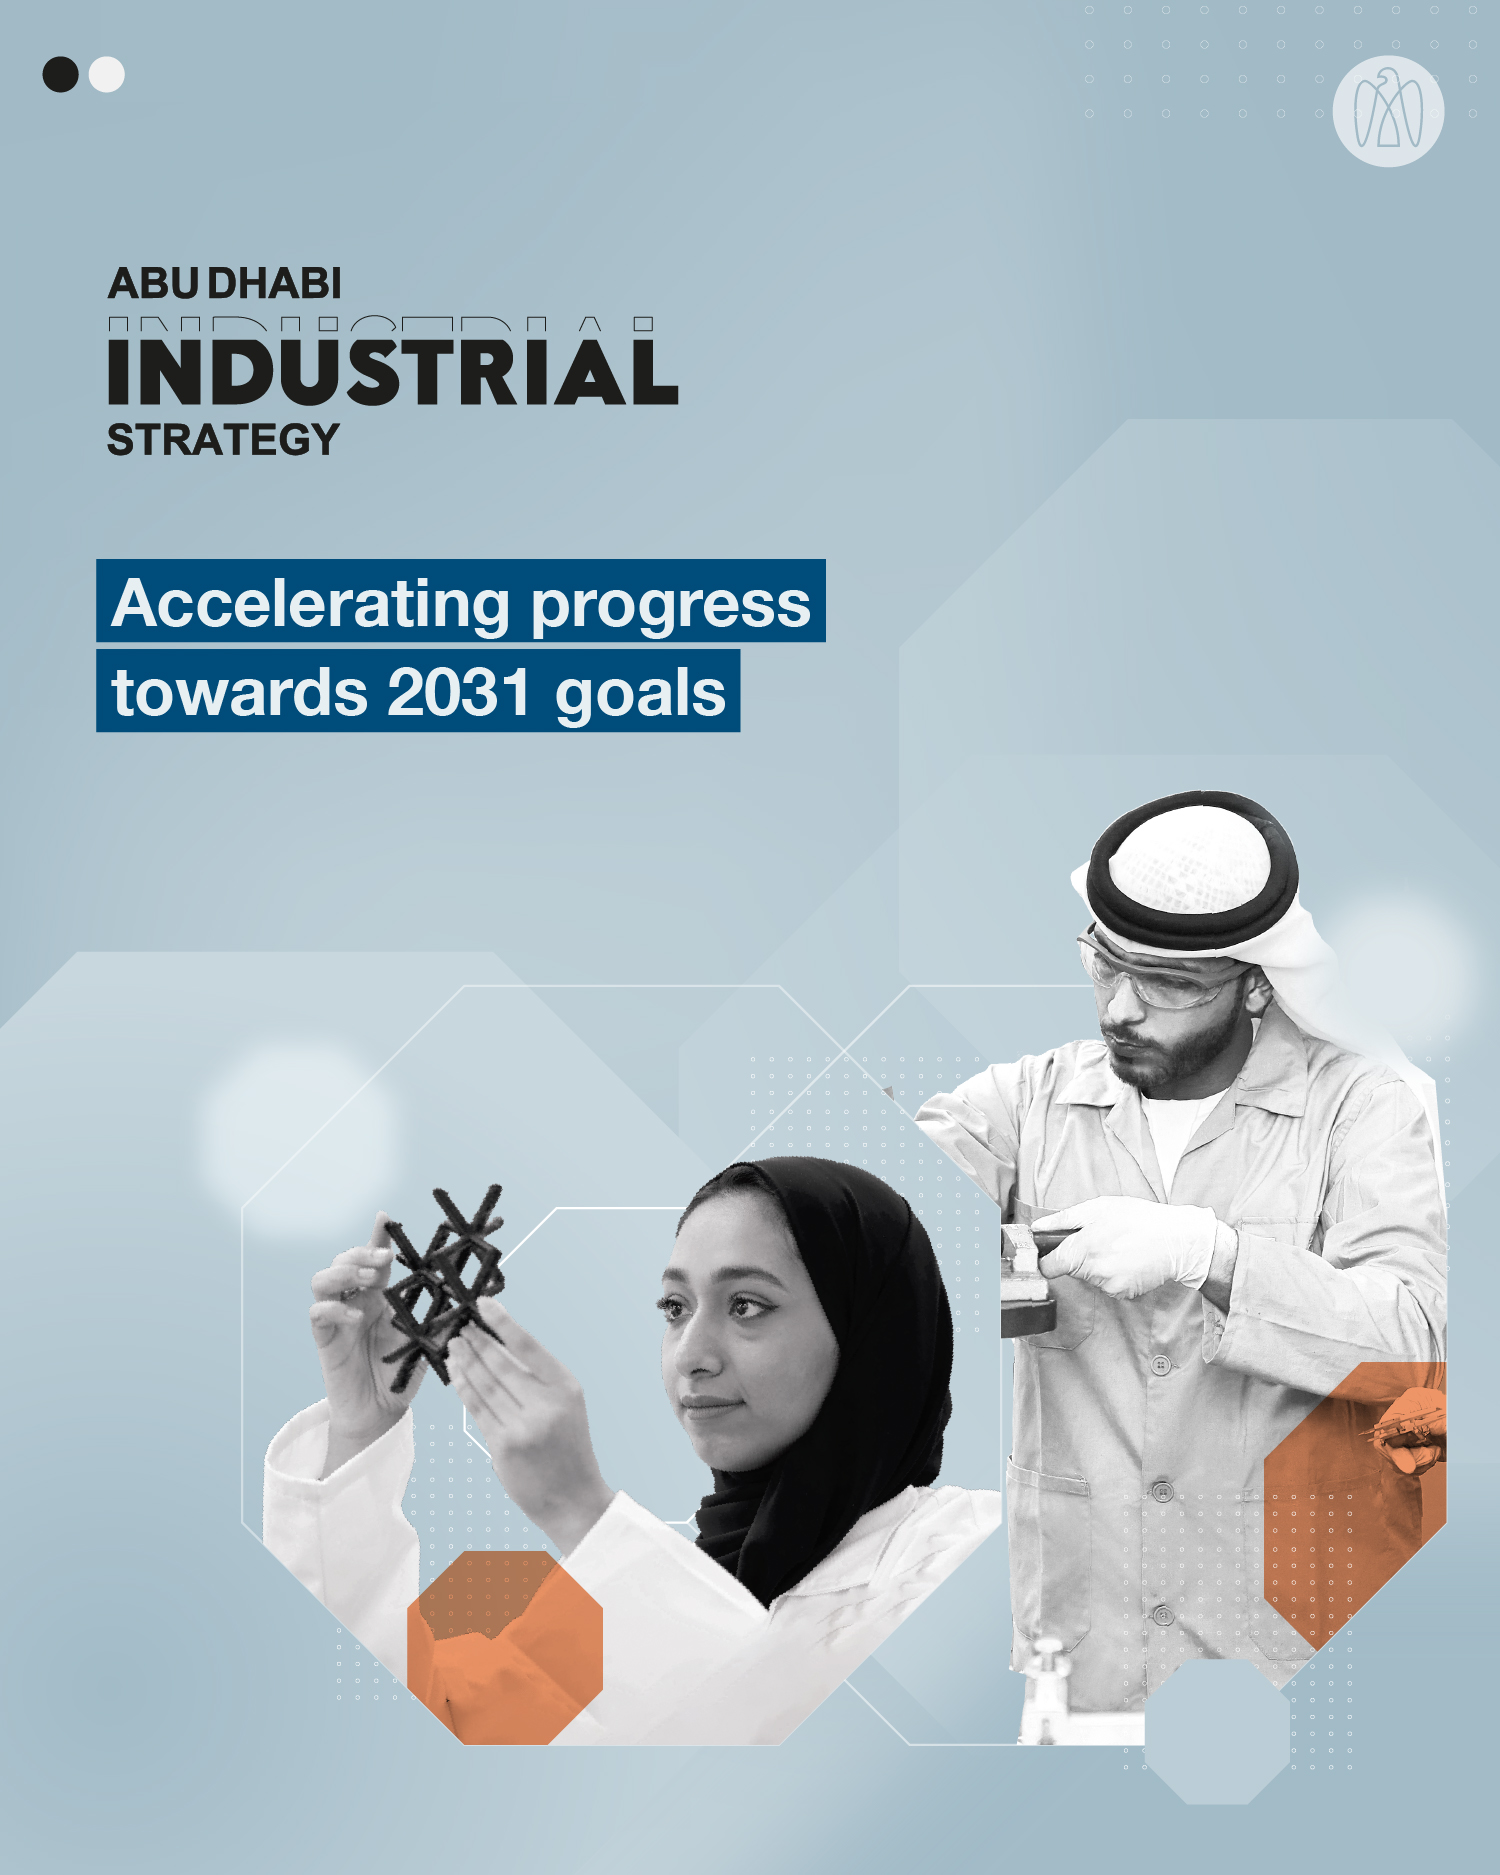 New Industrial Licences Surge 16.6% In First Year After Abu Dhabi Industrial Strategy Launch